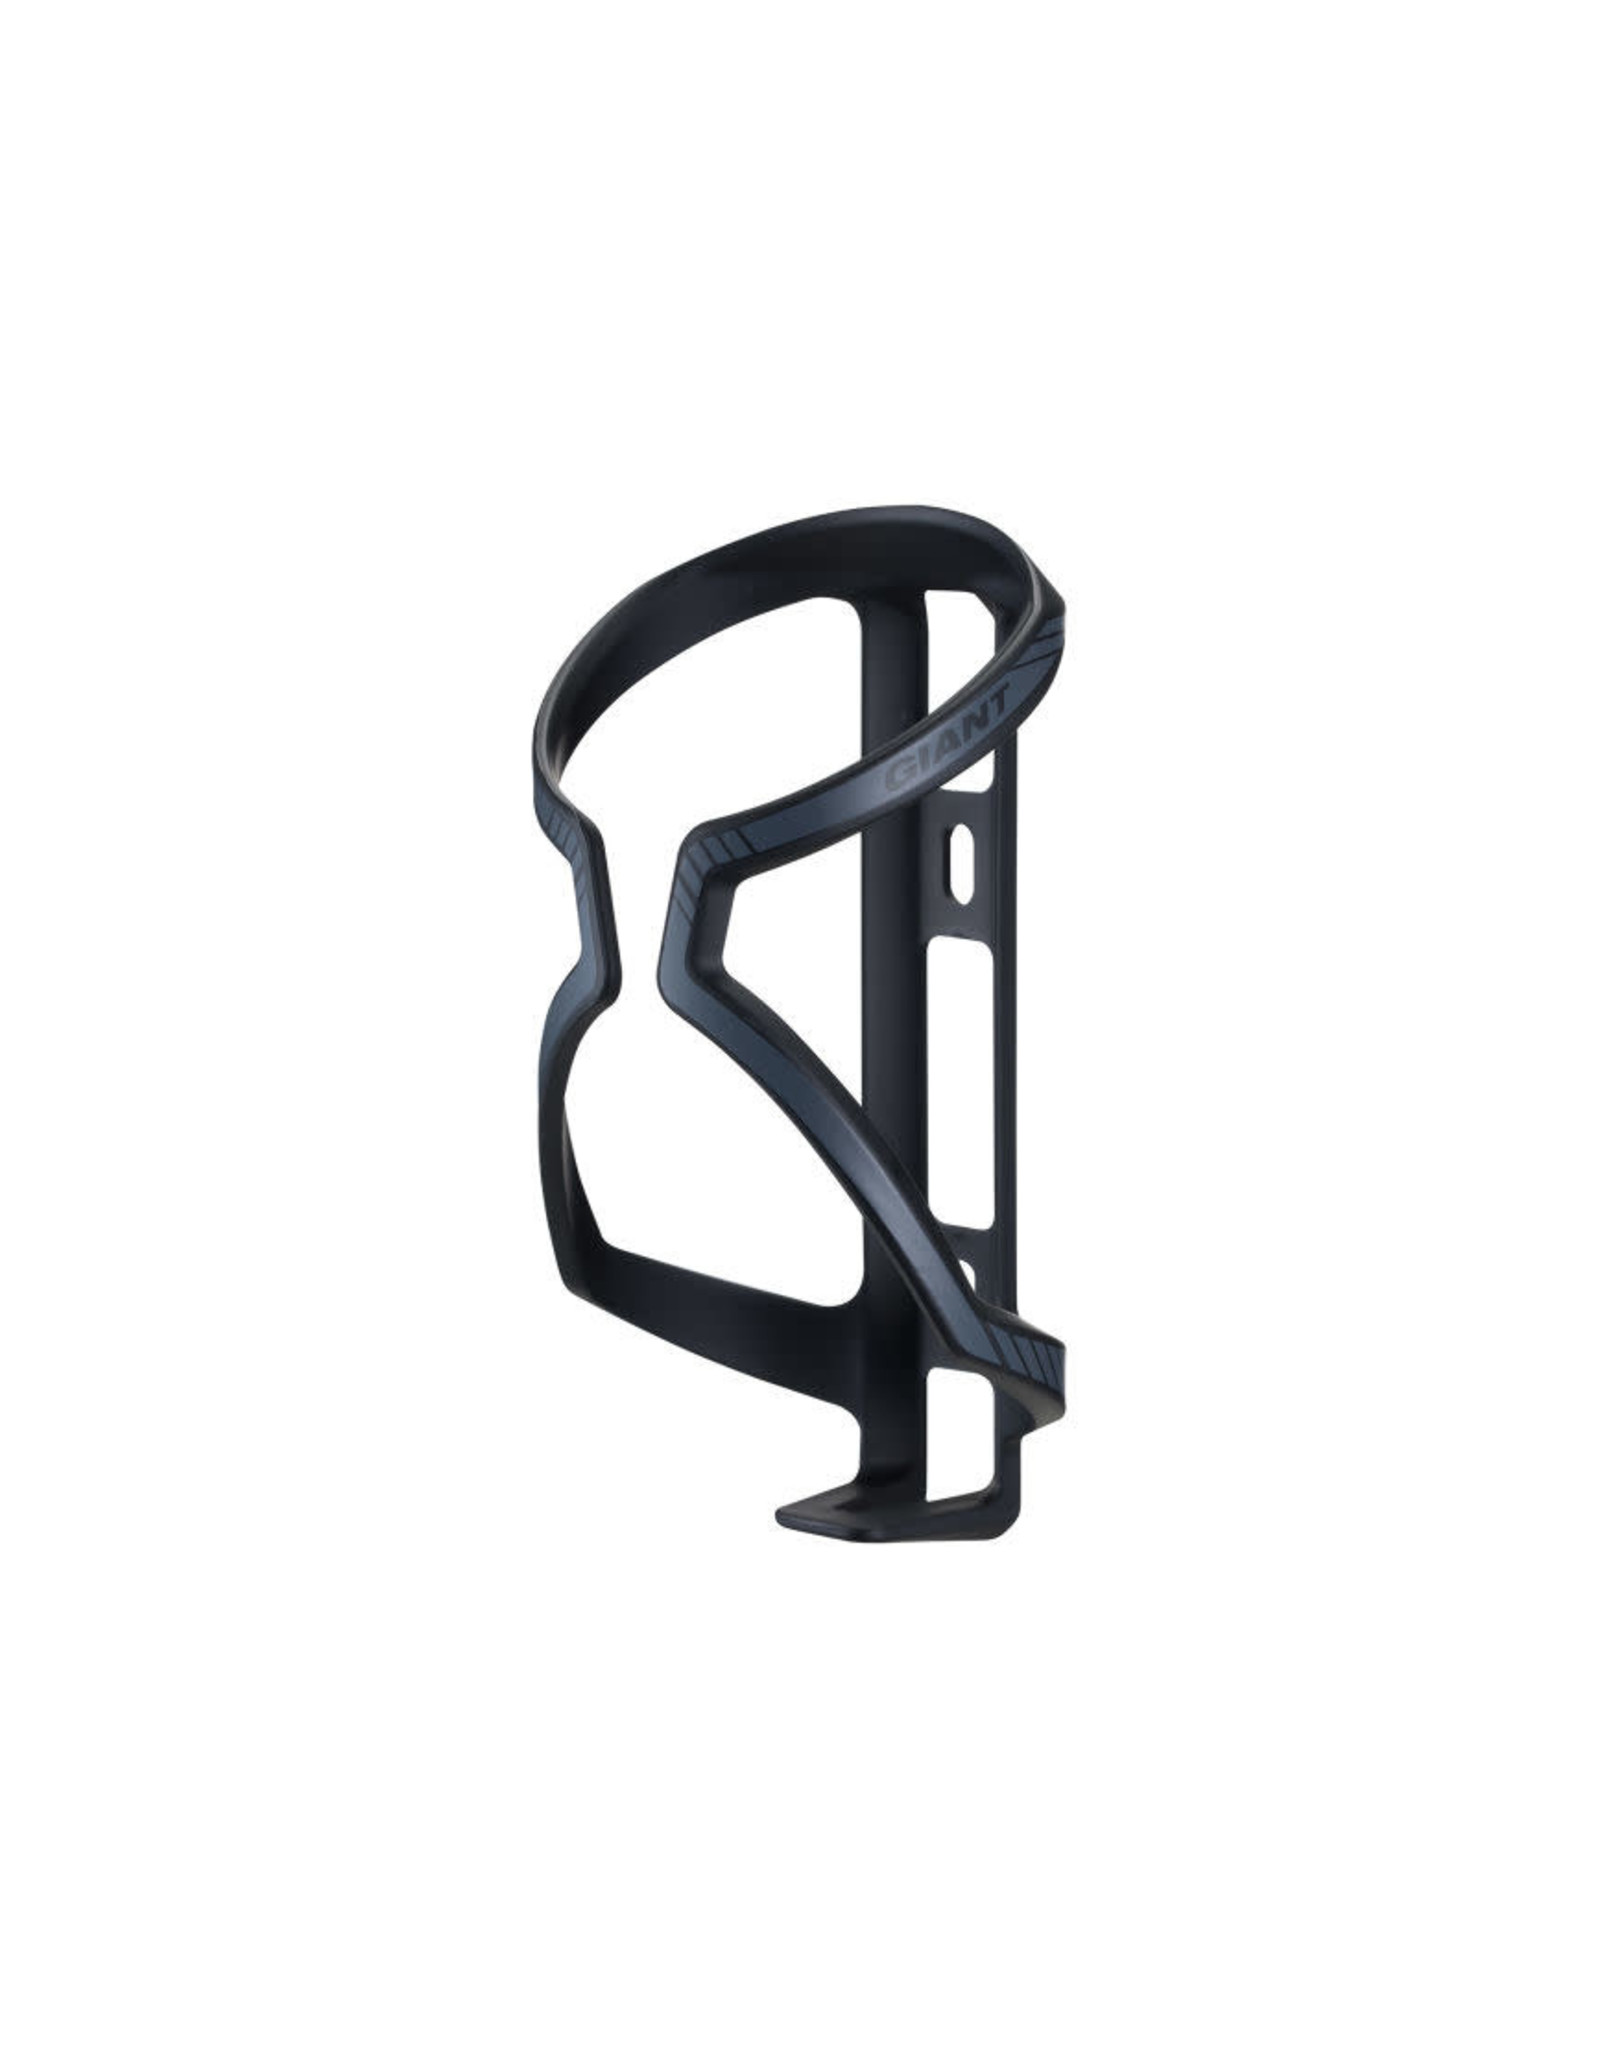 GIANT BICYCLES Airway Cage